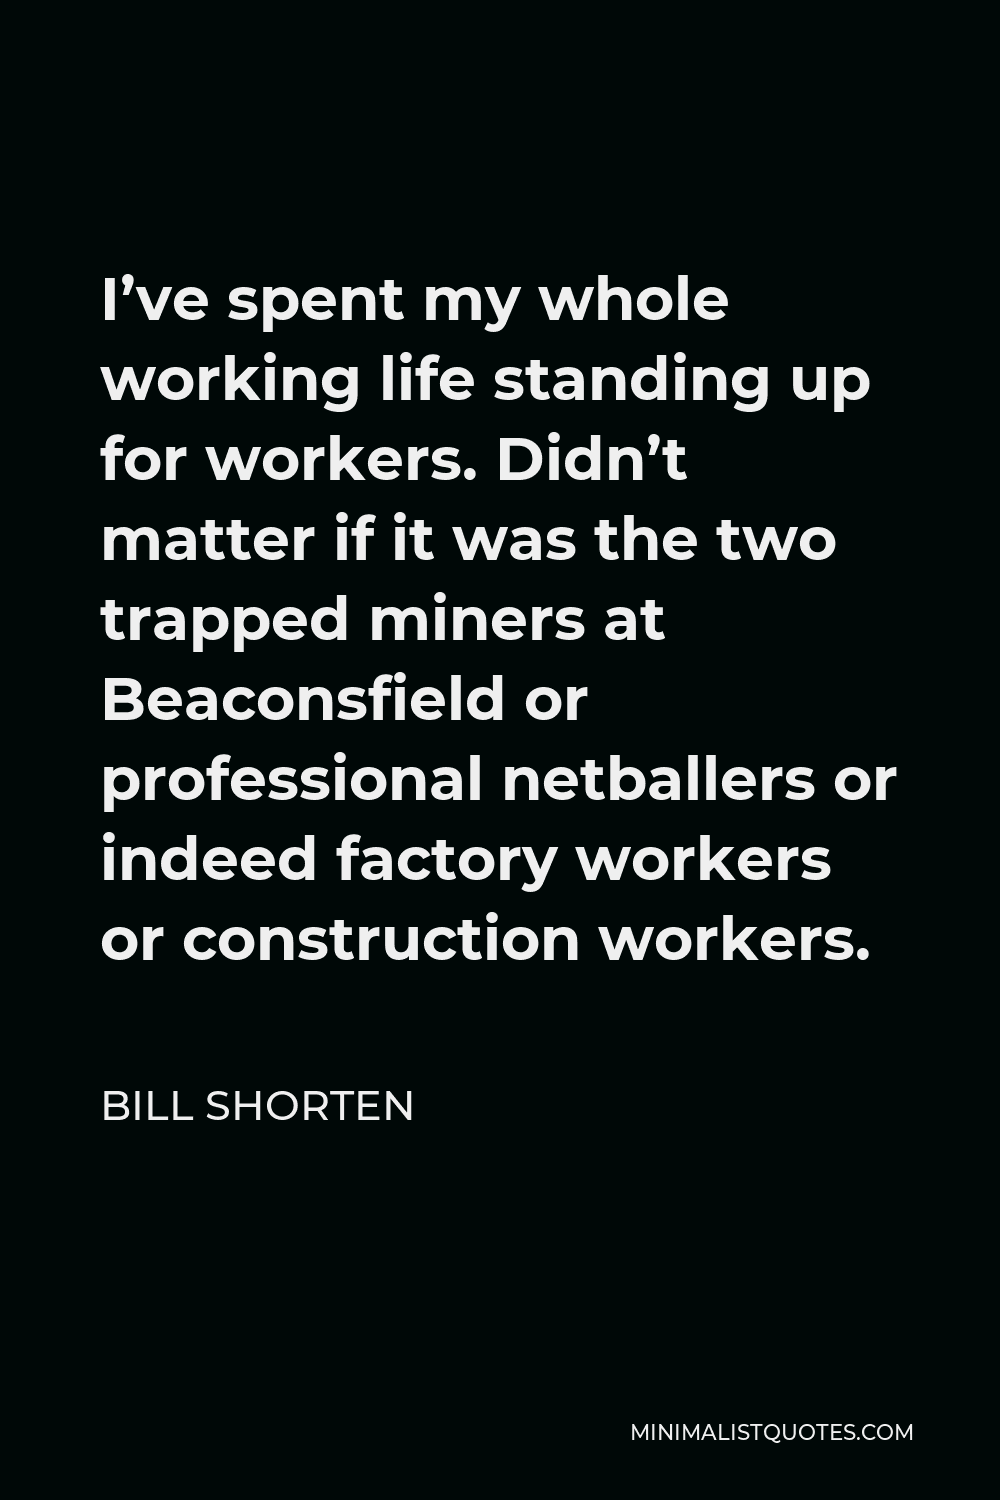 Bill Shorten Quote - I’ve spent my whole working life standing up for workers. Didn’t matter if it was the two trapped miners at Beaconsfield or professional netballers or indeed factory workers or construction workers.